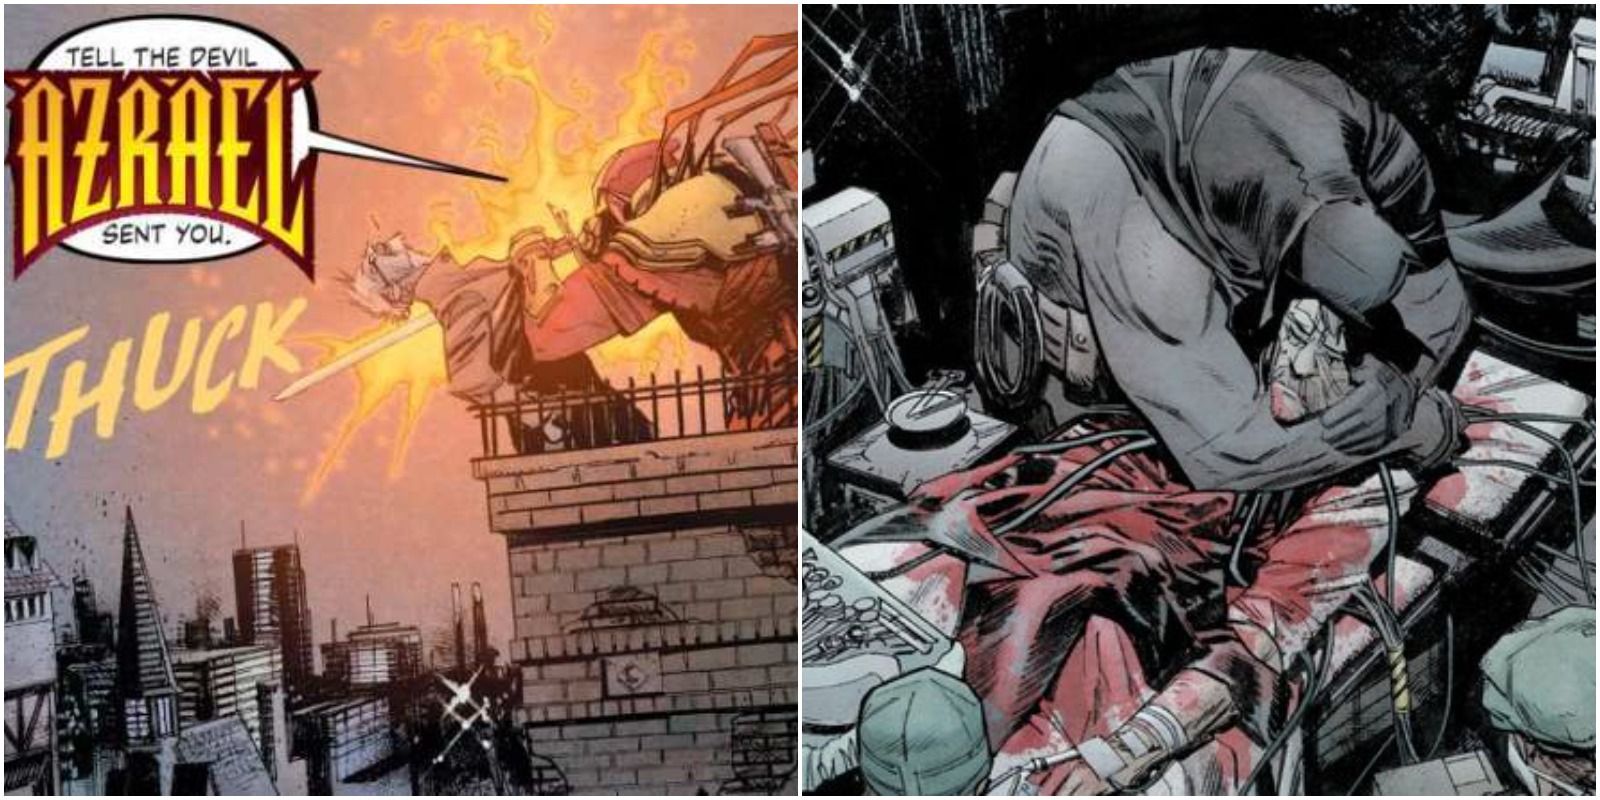 Azrael killing Commissioner James Gordon in Curse of the White Knight, and Batman mourning his death